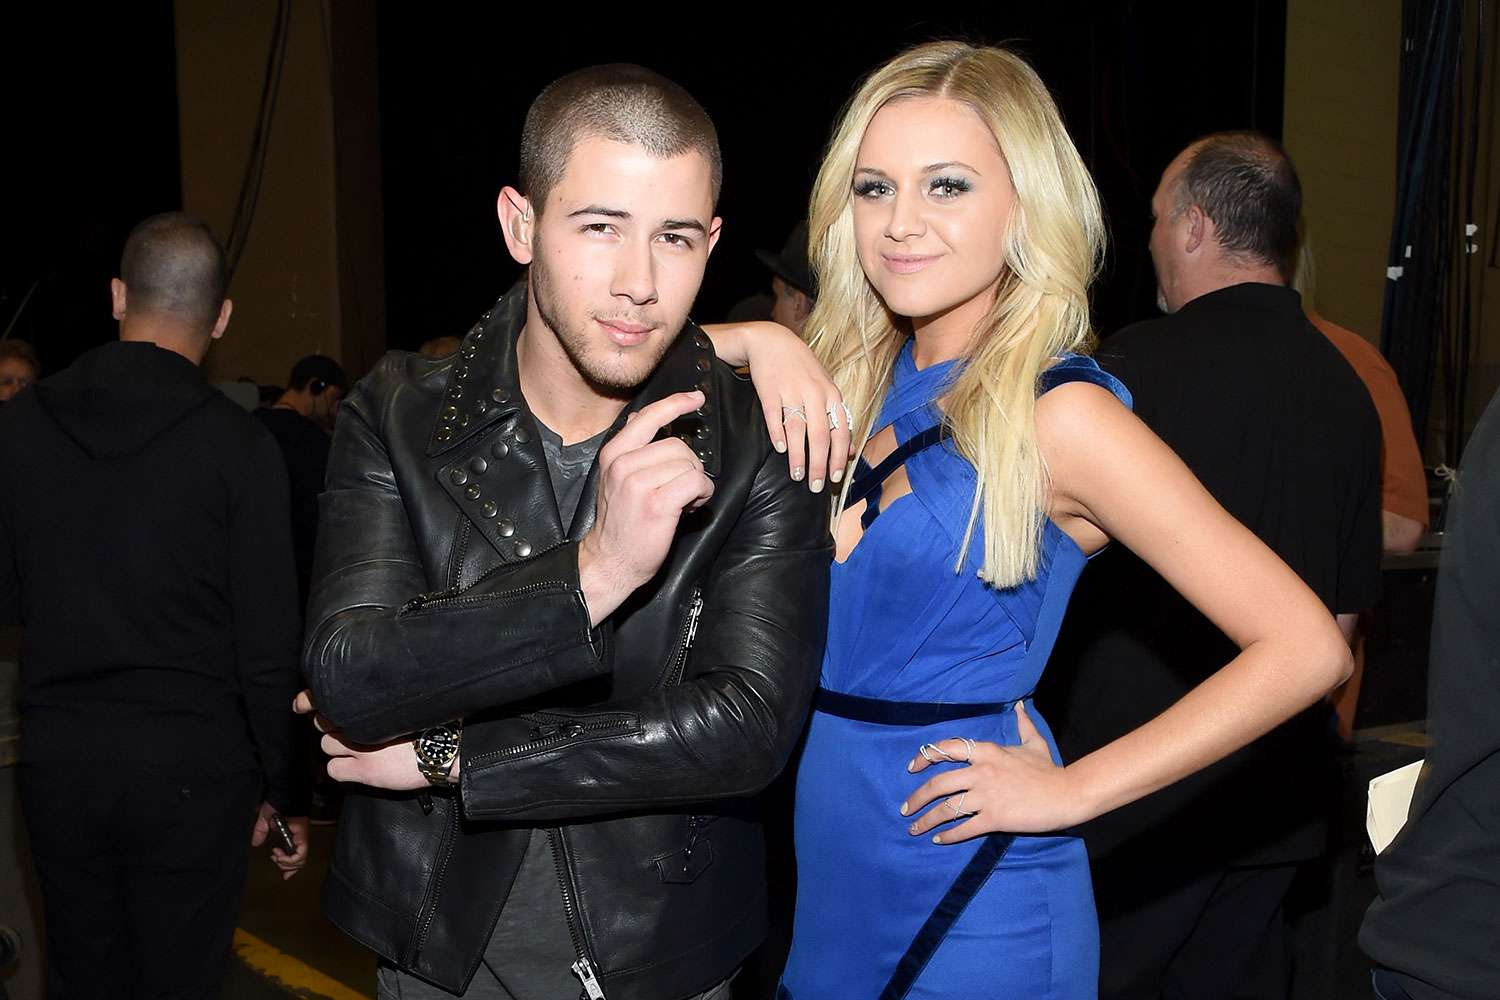 LAS VEGAS, NEVADA - APRIL 03: Recording artists Nick Jonas (L) and Kelsea Ballerini attend the 51st Academy of Country Music Awards at MGM Grand Garden Arena on April 3, 2016 in Las Vegas, Nevada. (Photo by Larry Busacca/ACM2016/Getty Images for dcp)